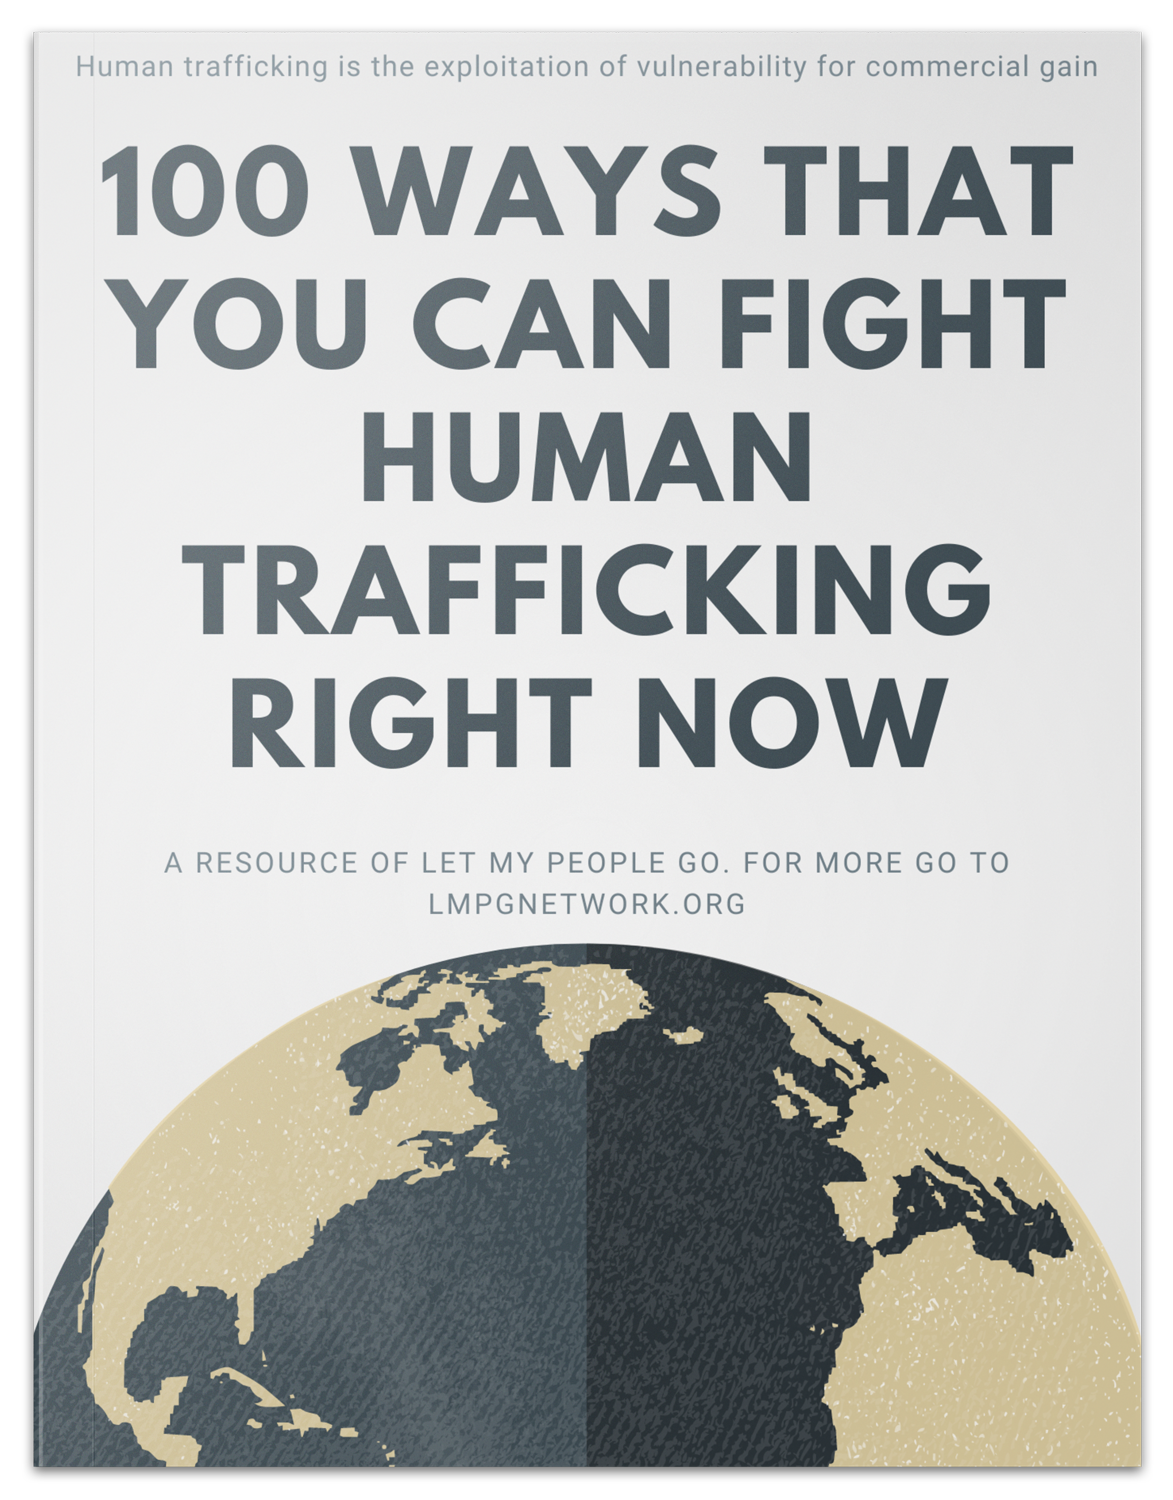 100 Ways That You Can Fight Human Trafficking Right Now